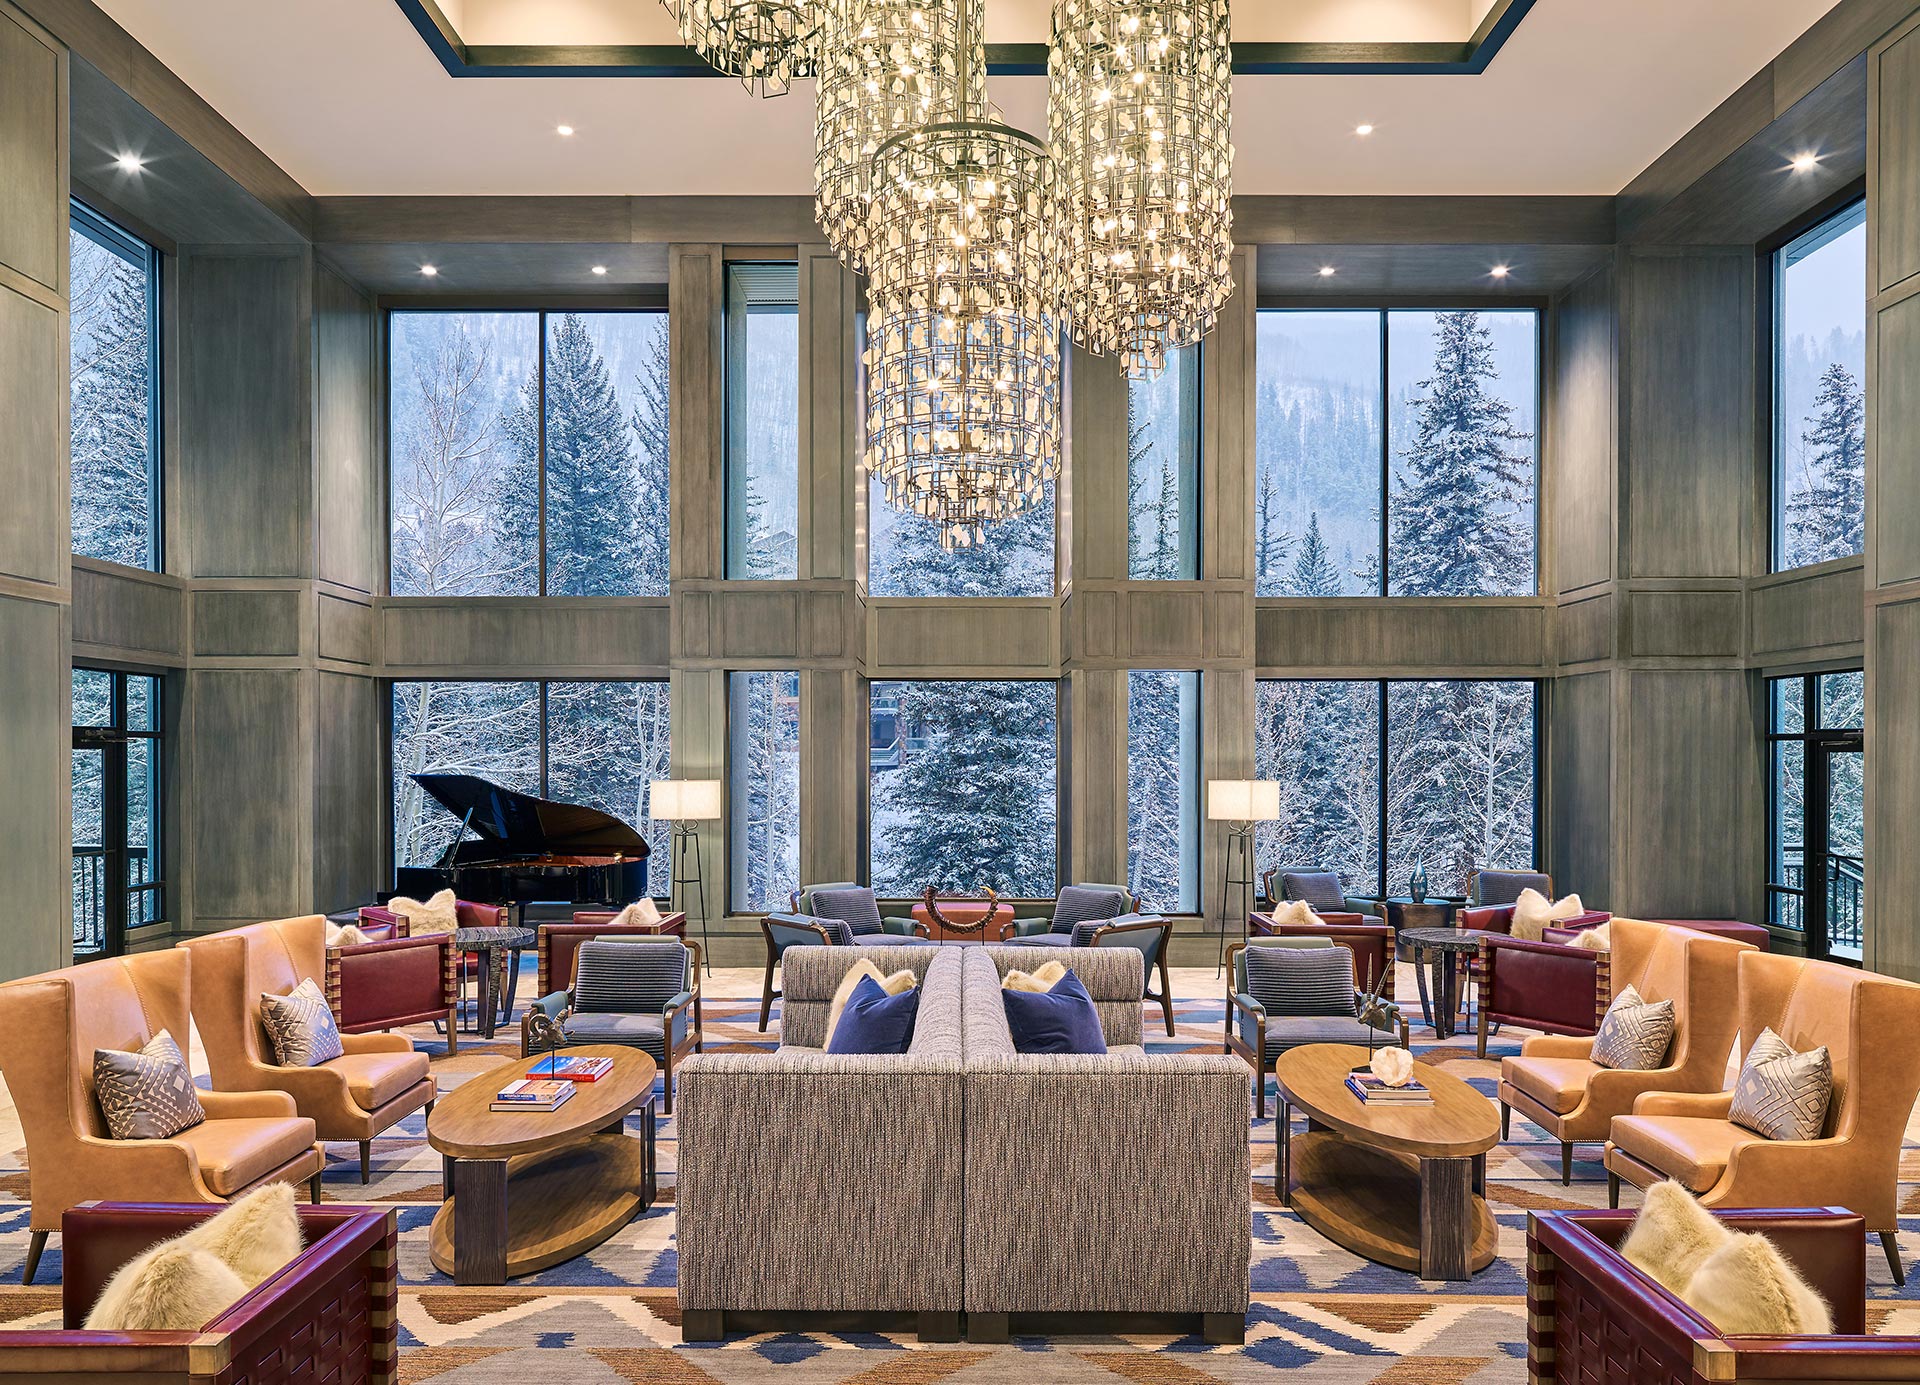 news-main-hotel-talisa-in-vail-joins-the-luxury-collection-as-the-portfolios-first-ski-destination-resort-in-north-america.jpg